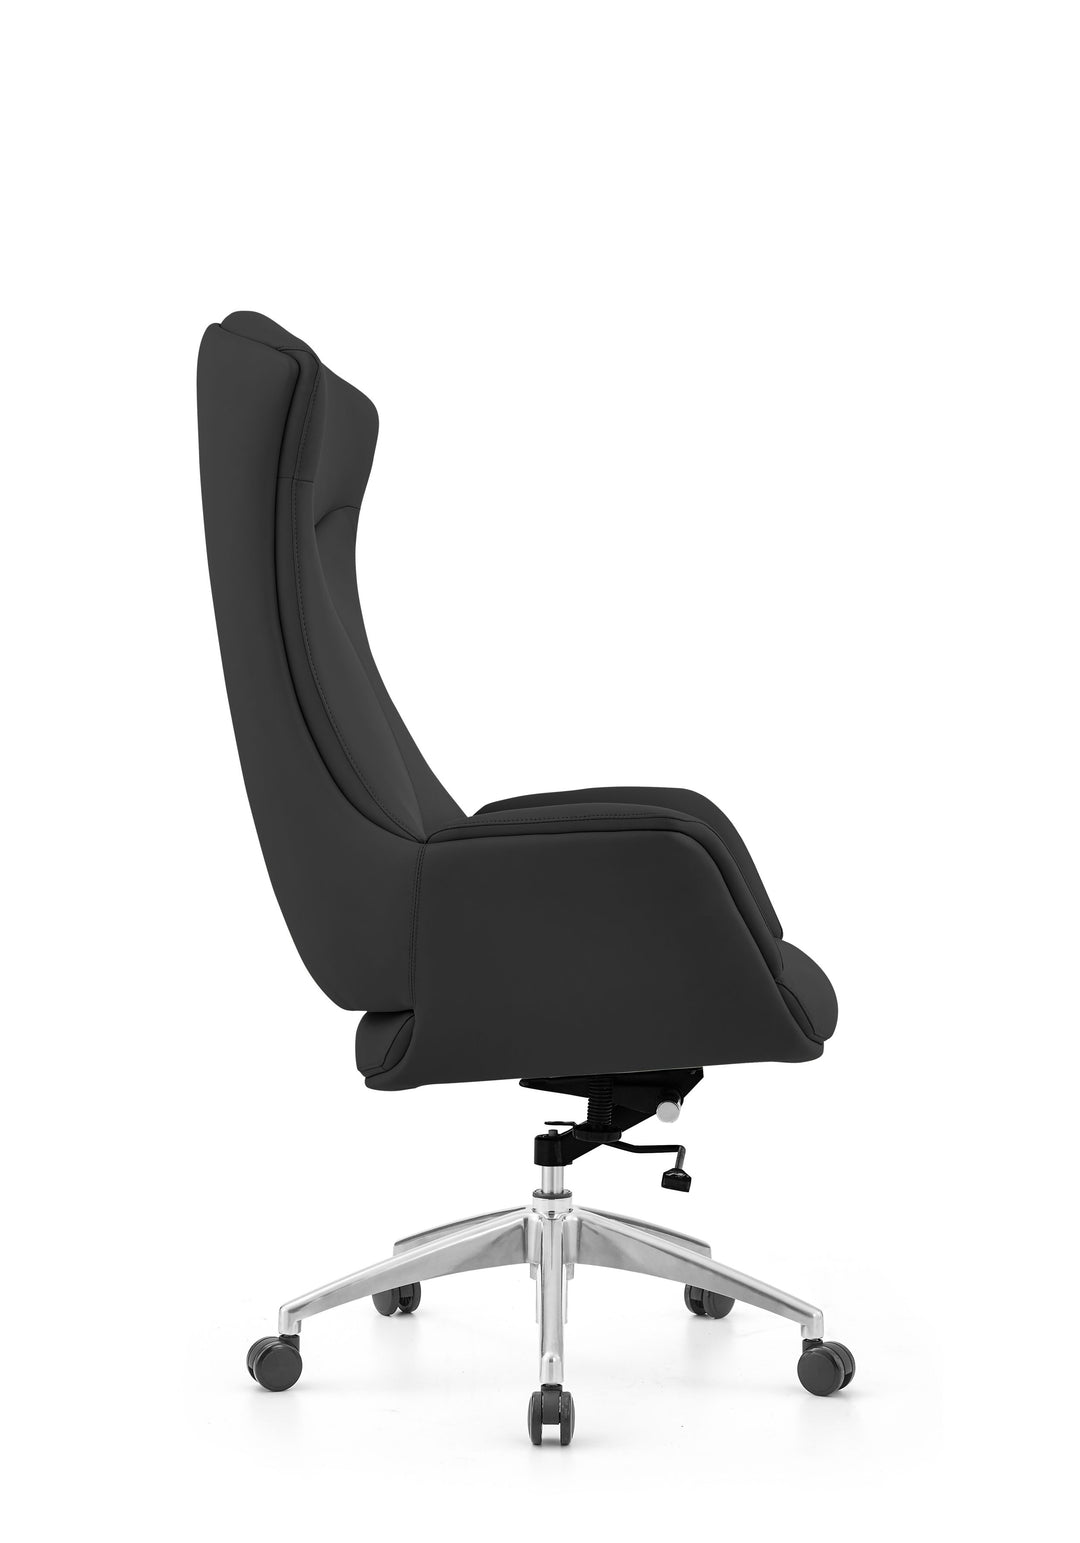 Desk one Prestige leather office chair